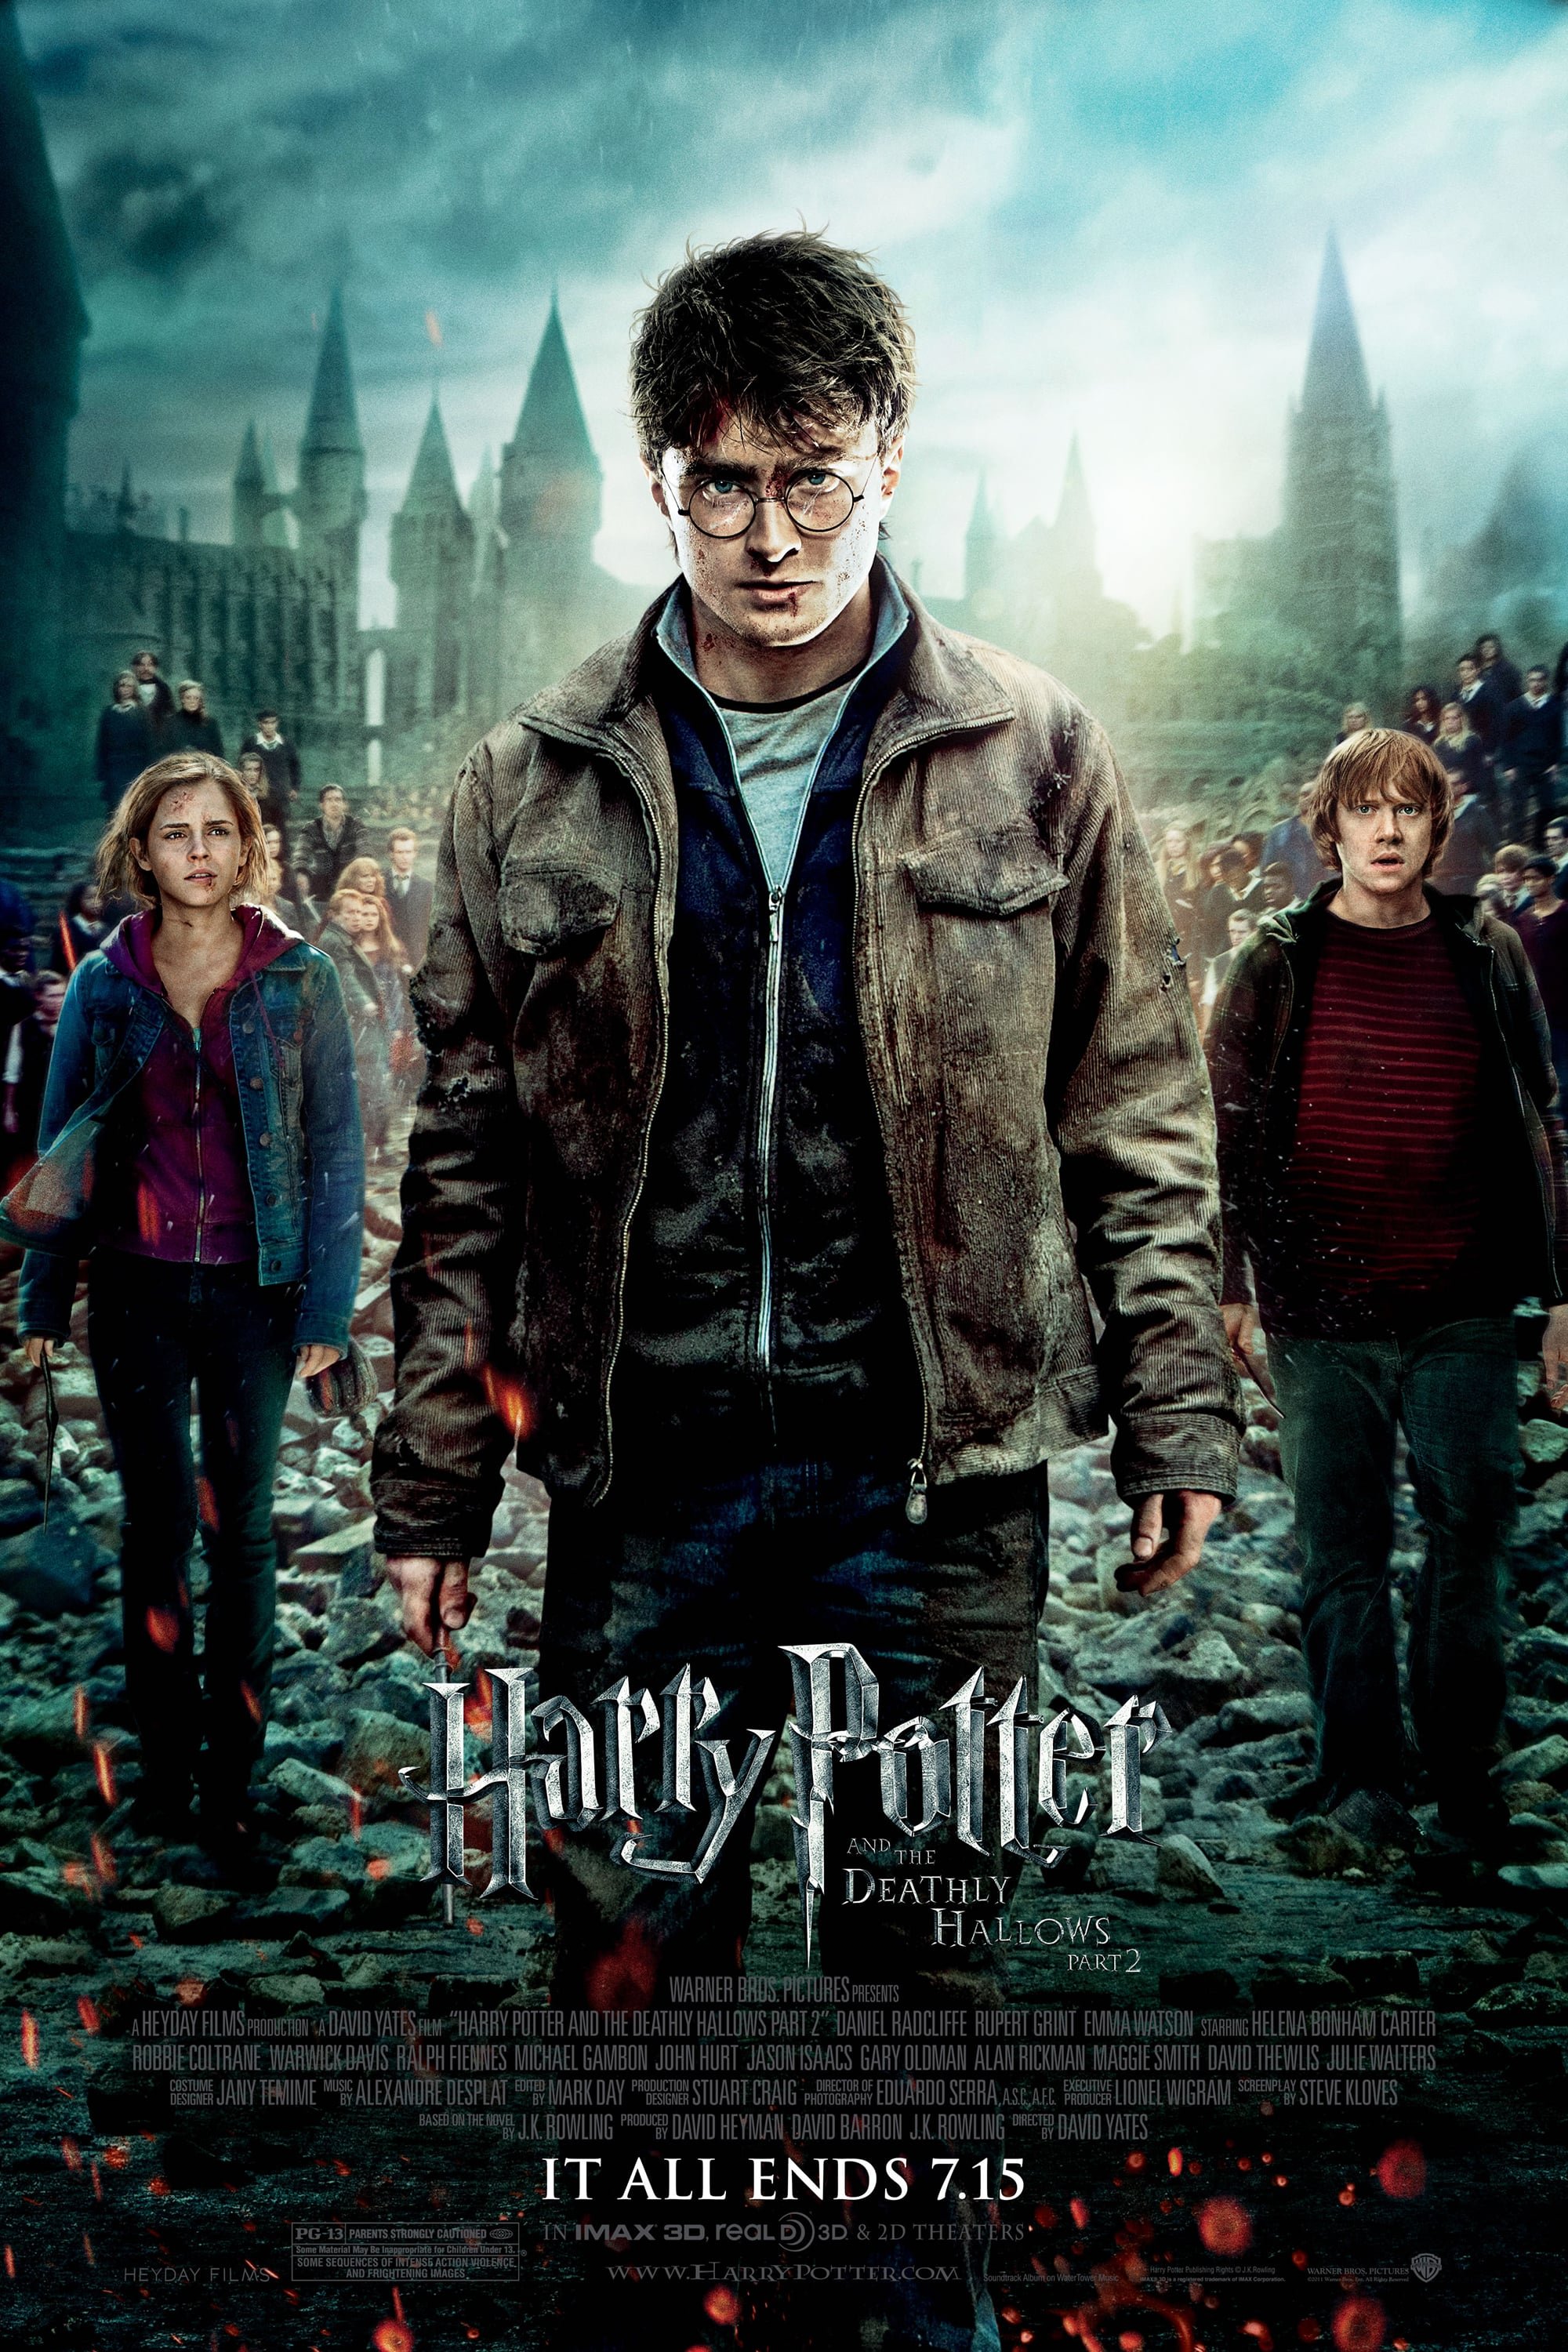 Harry Potter And The Deathly Hallows - Part 2.jpg